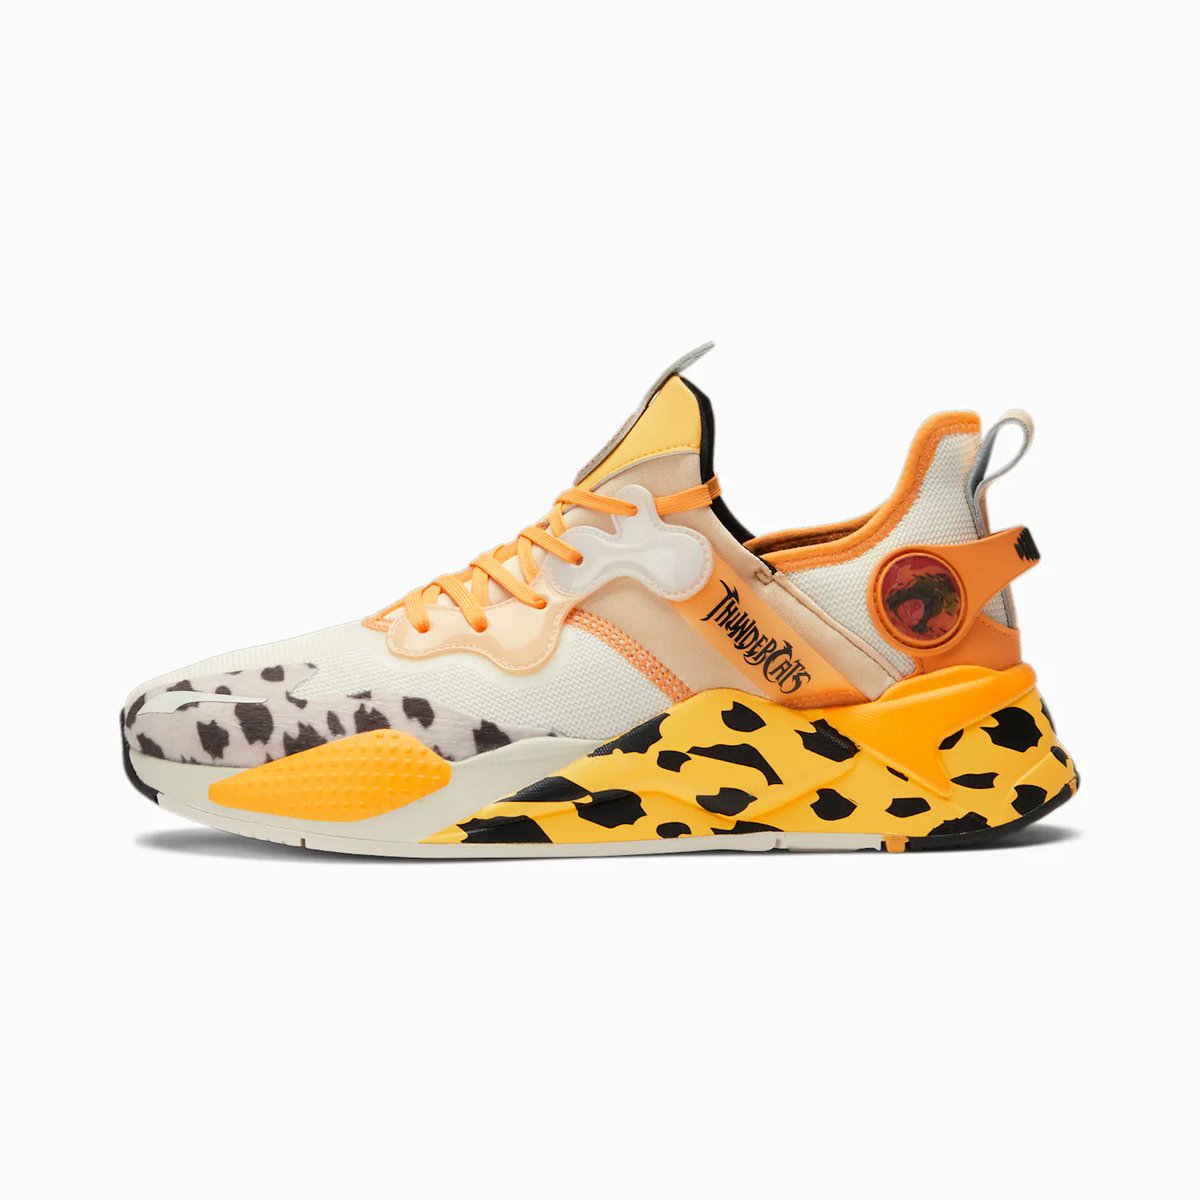 salaris vegetarisch verrassing SNKR_TWITR on Twitter: "Dropping tomorrow 7am PT/10am ET: Nike React  Element 55 'White/University Gold/Black/Lucid Green' Champs  https://t.co/YAZQJaAKA5 Eastbay https://t.co/2MSIwp9ic7 Footaction  https://t.co/VNQfLBWCii Footlocker https://t.co ...